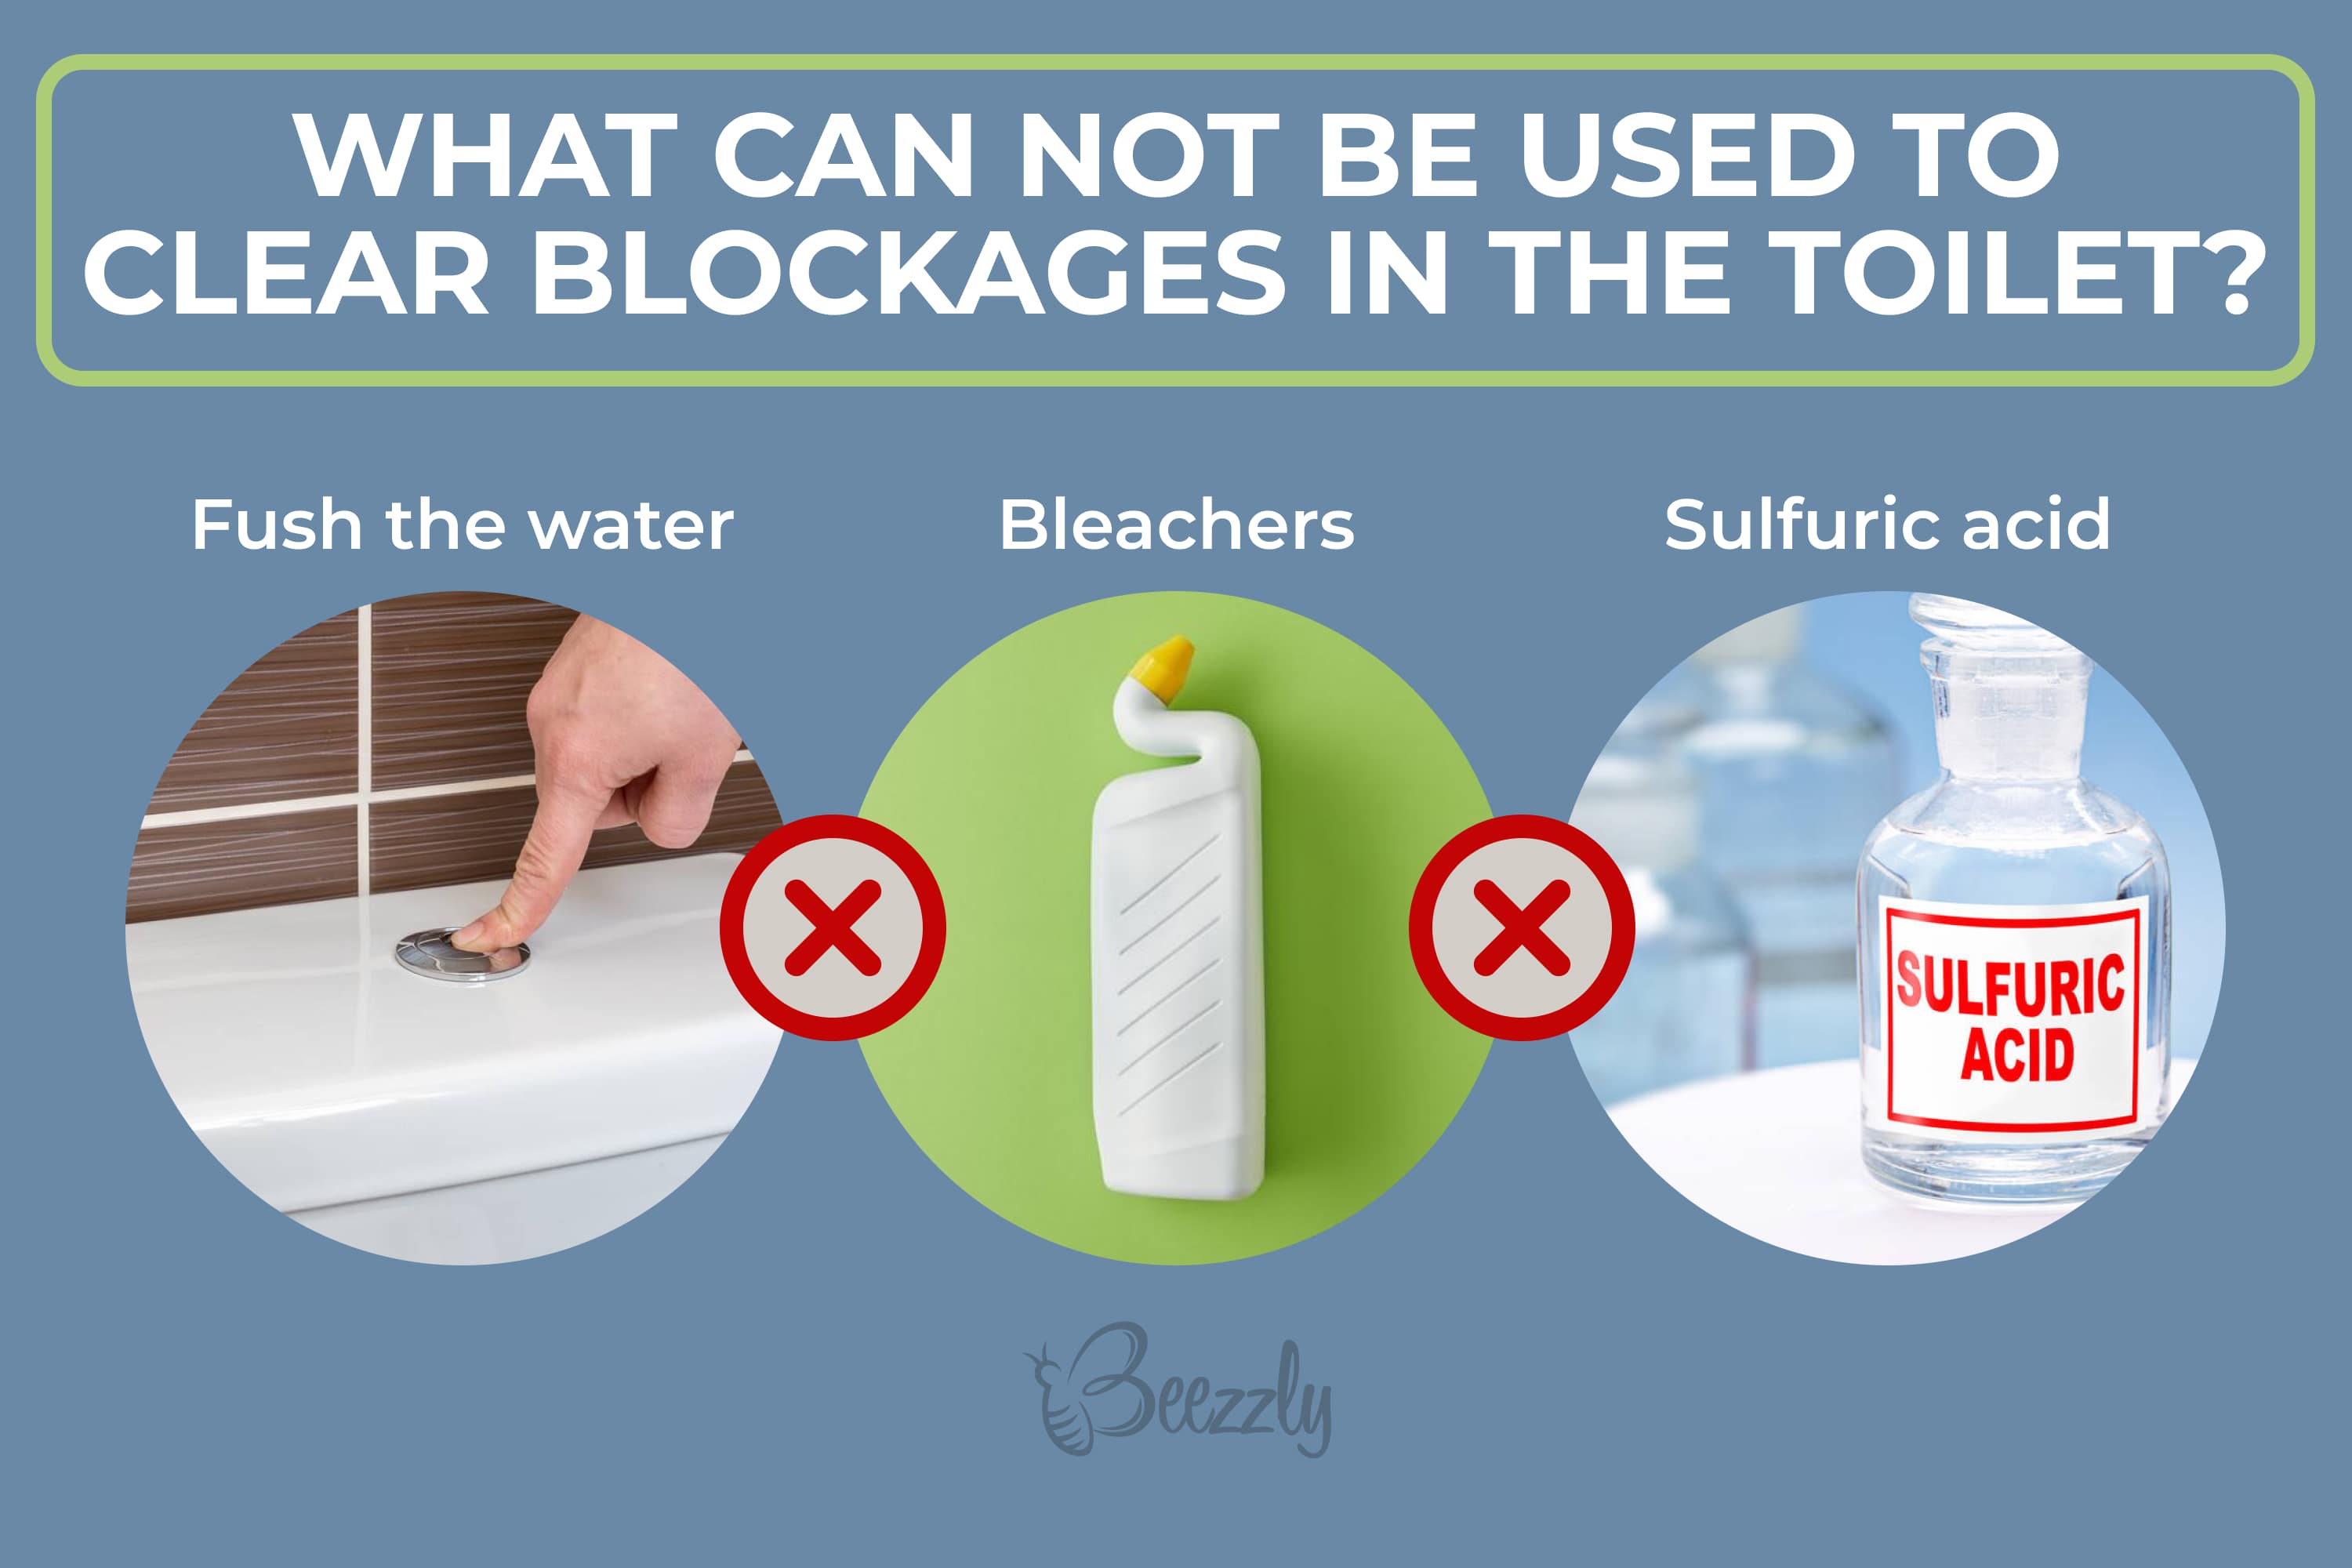 What can not be used to clear blockages in the toilet